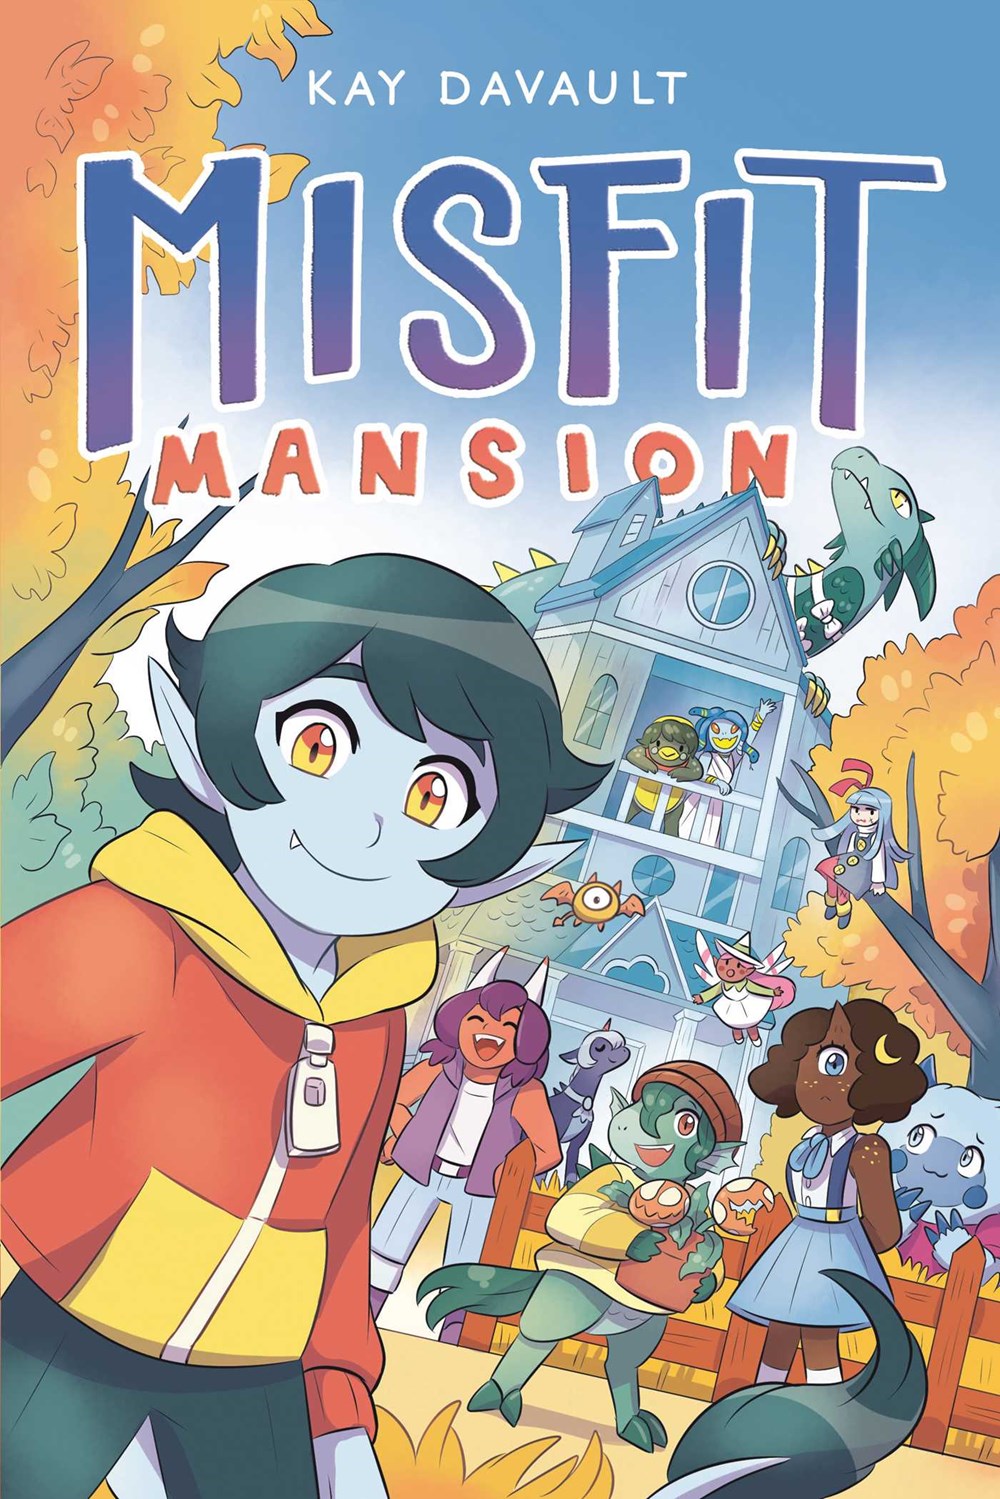 Misfit Mansion by Kay Davault